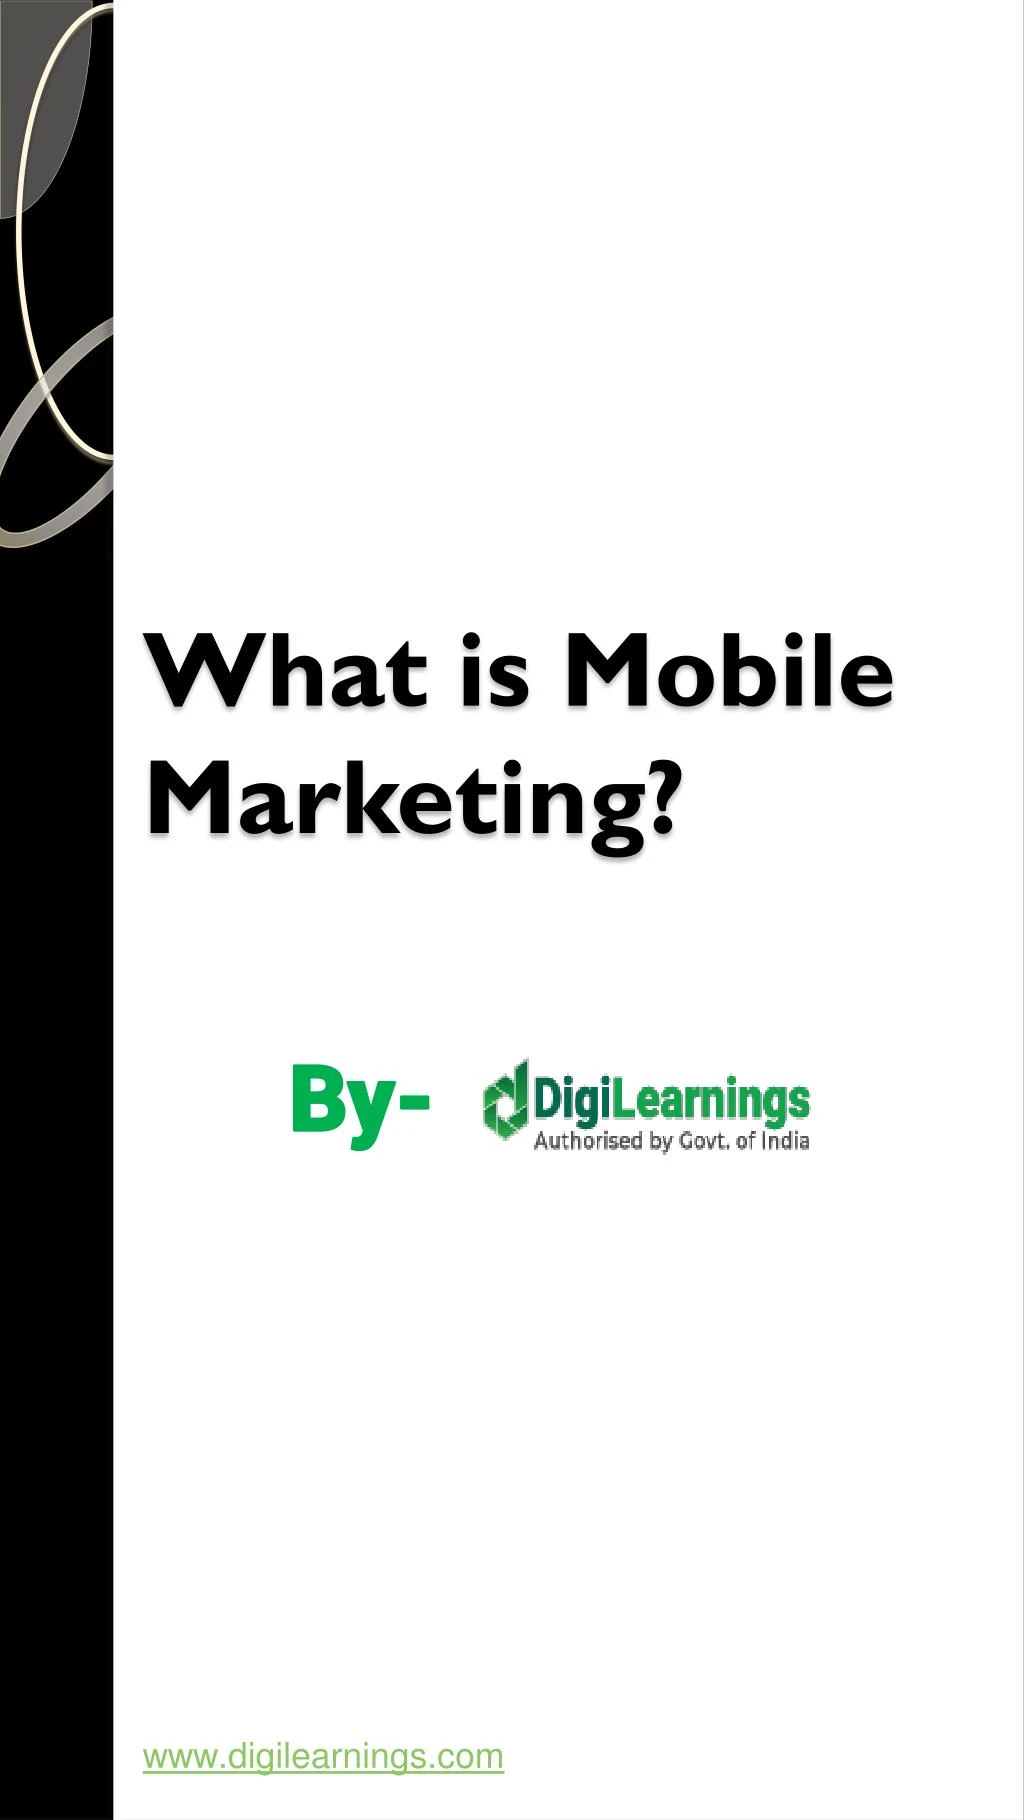 what is mobile marketing